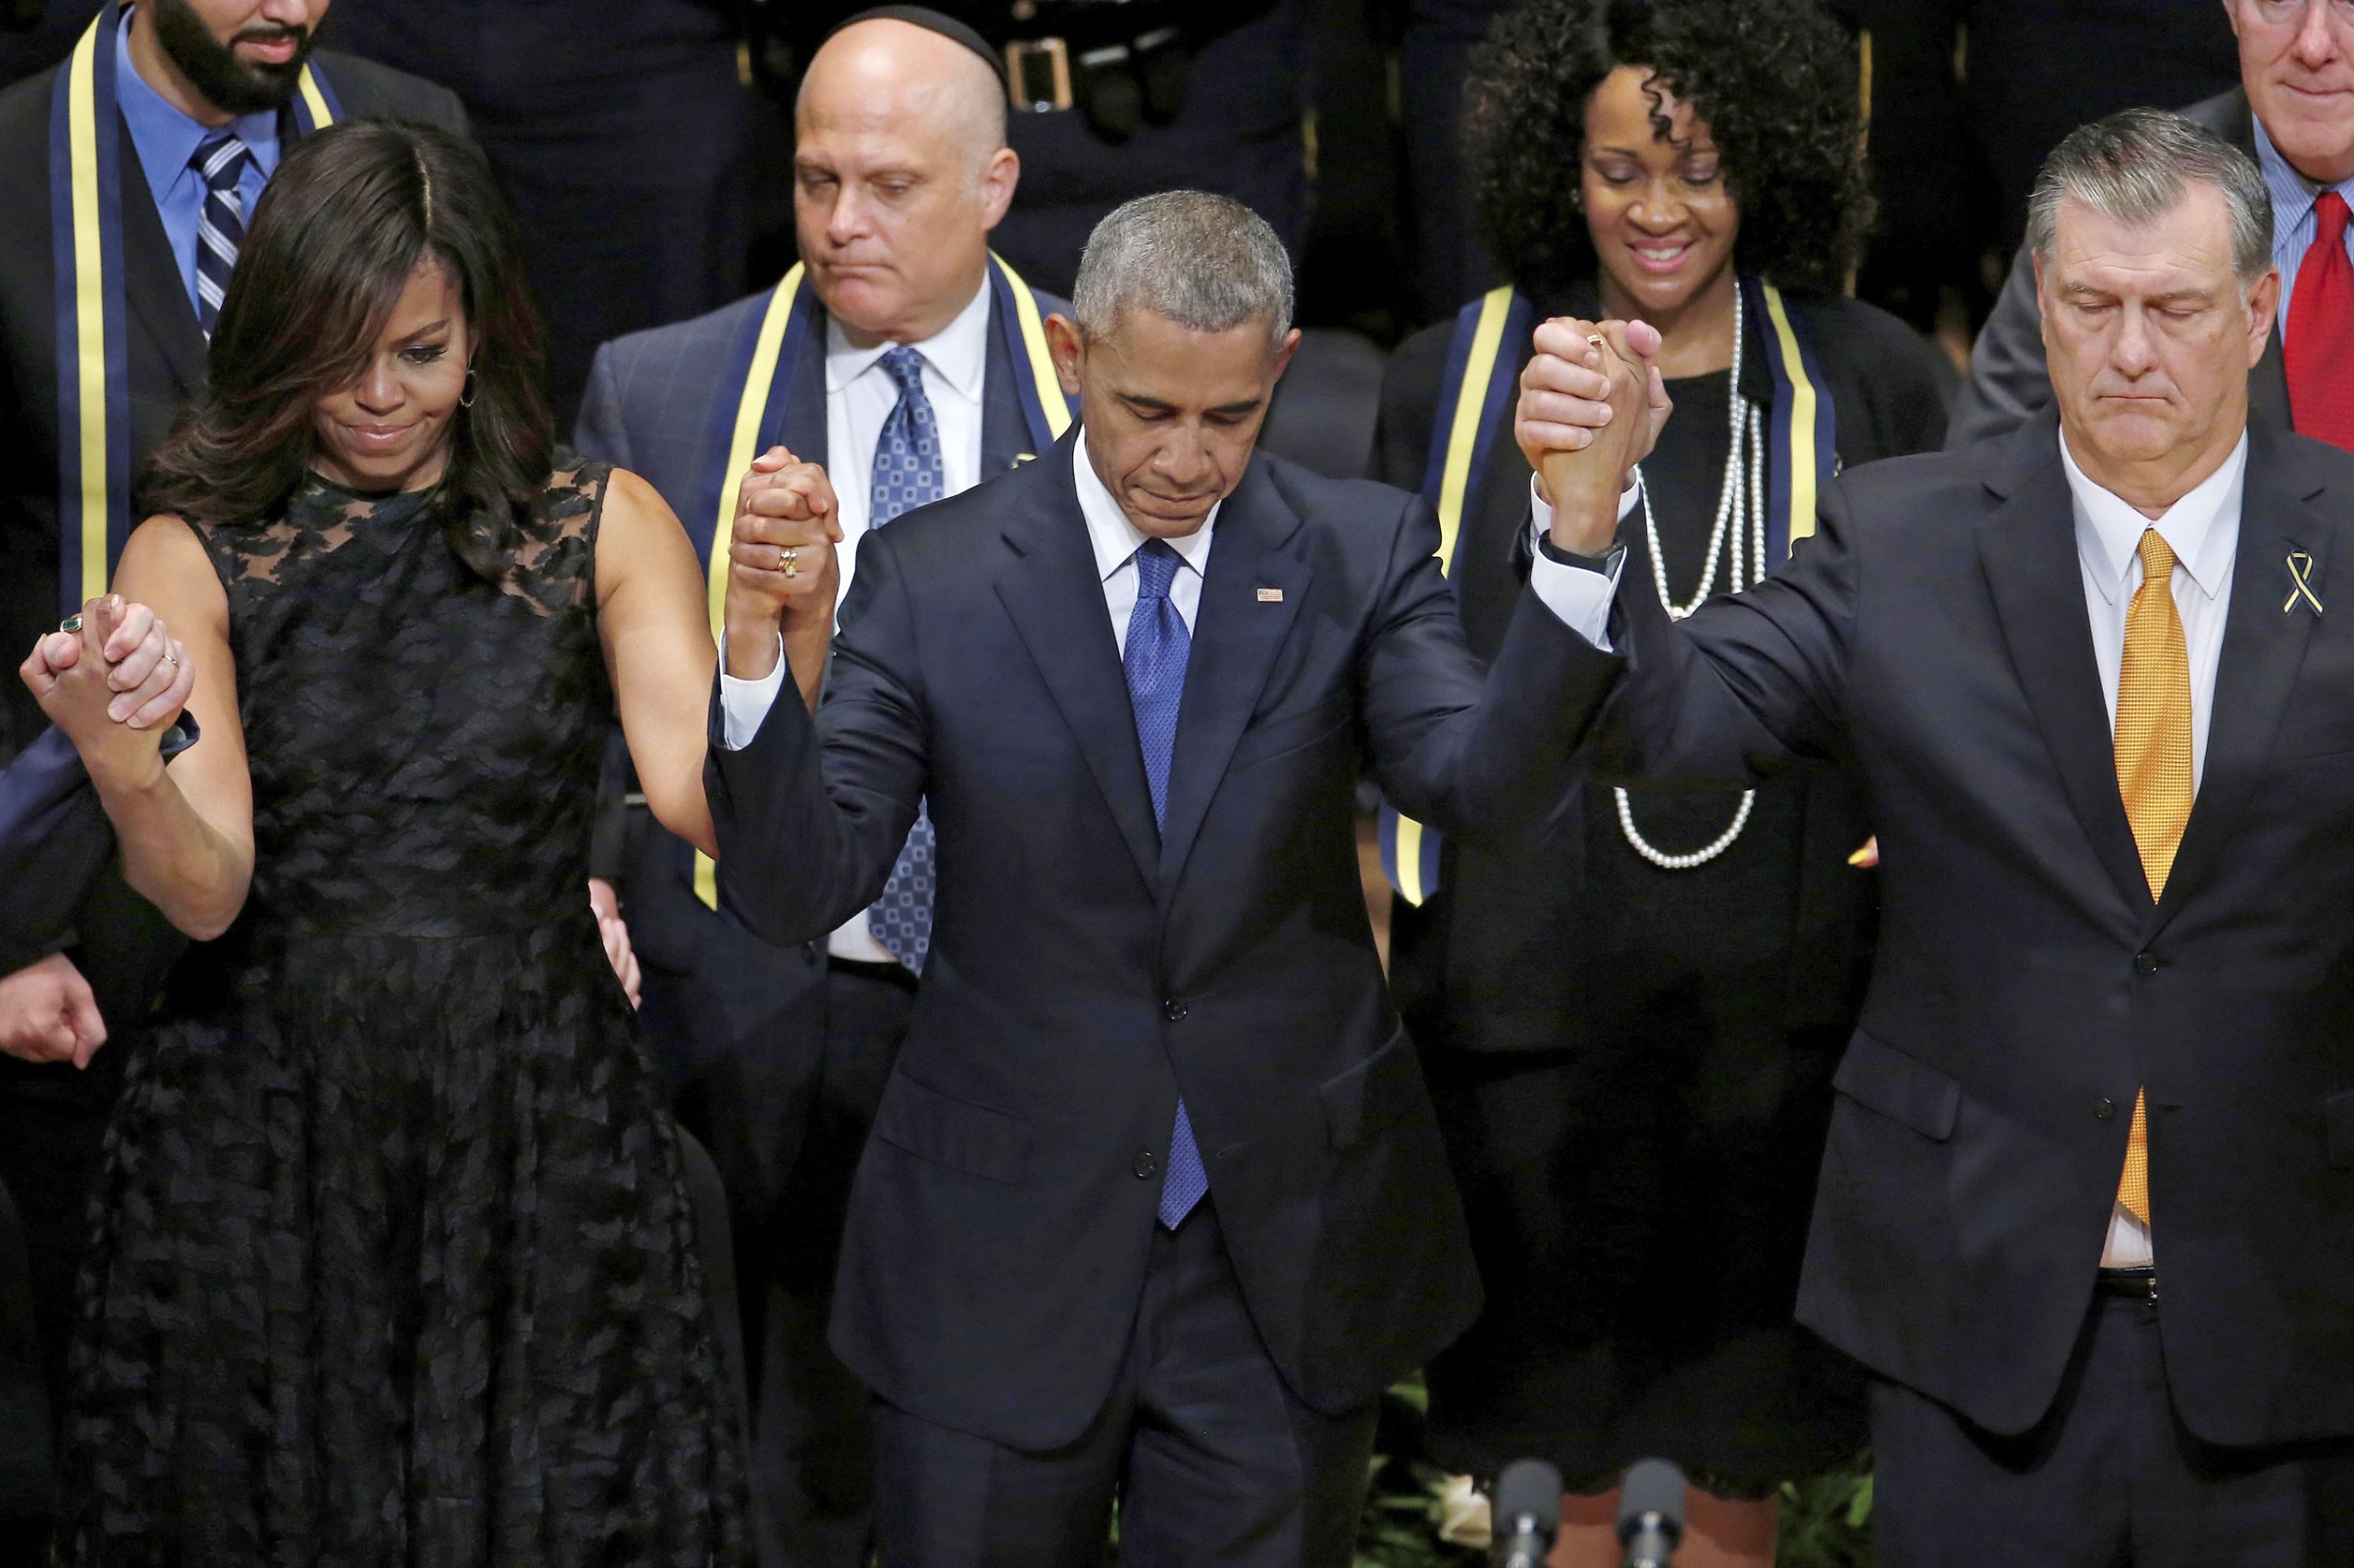 At a service for the five Dallas police officers killed on July 8, President Obama, with Michelle Obama and Dallas Mayor Mike Rawlings, said he had “spoken at too many memorials”